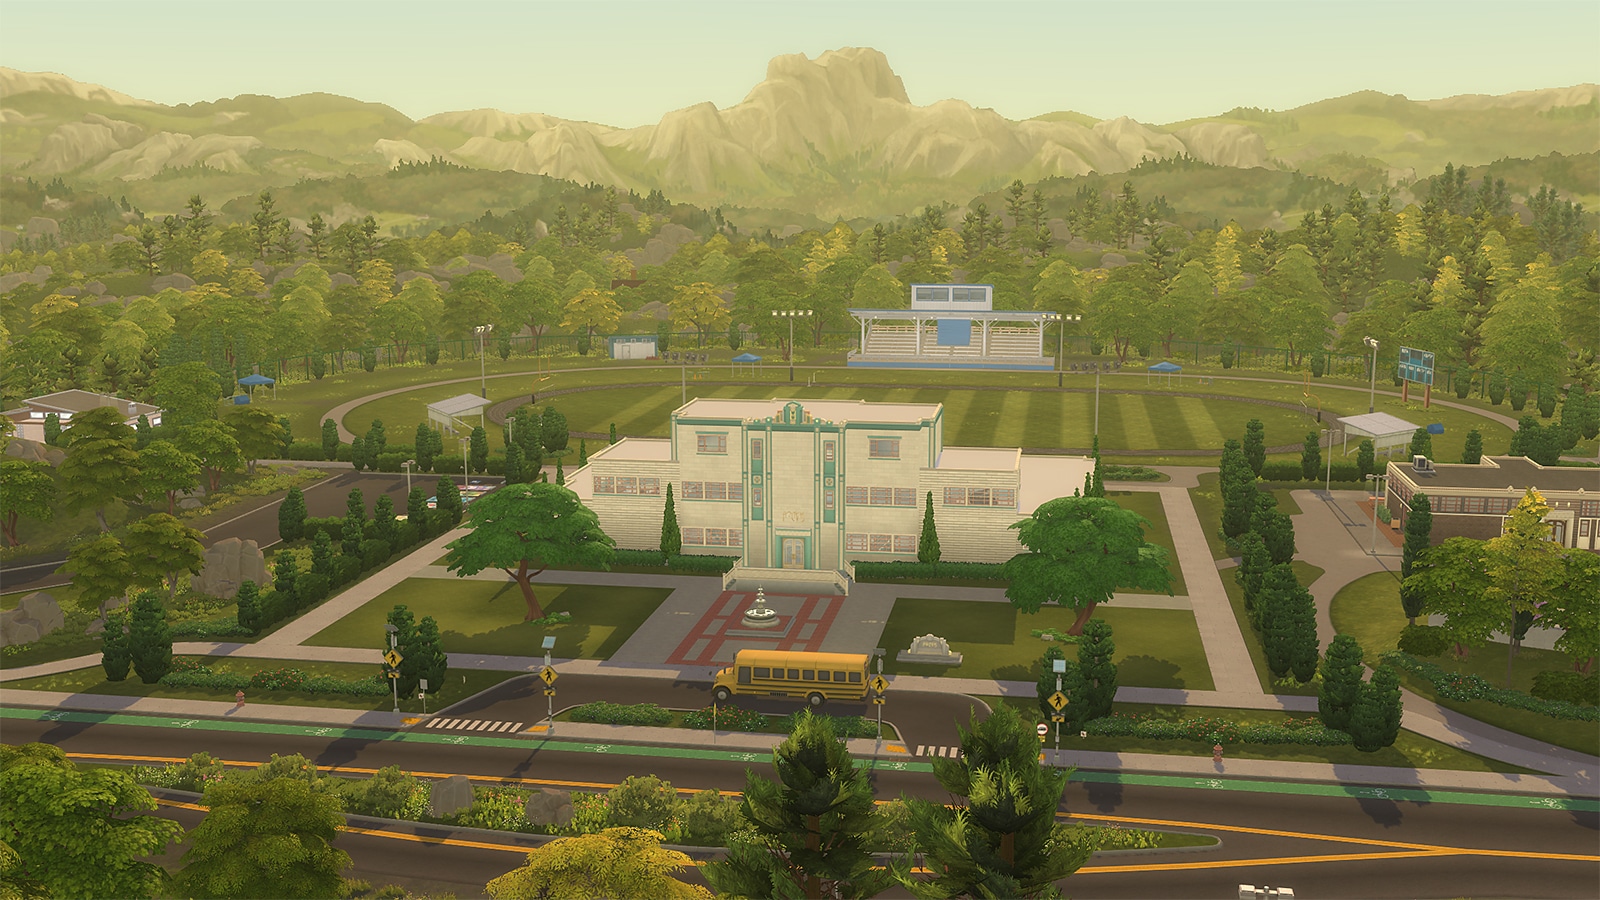 https://editors.dexerto.com/wp-content/uploads/2022/07/31/the-sims-4-high-school-years-review-copperdale-high-school.jpg